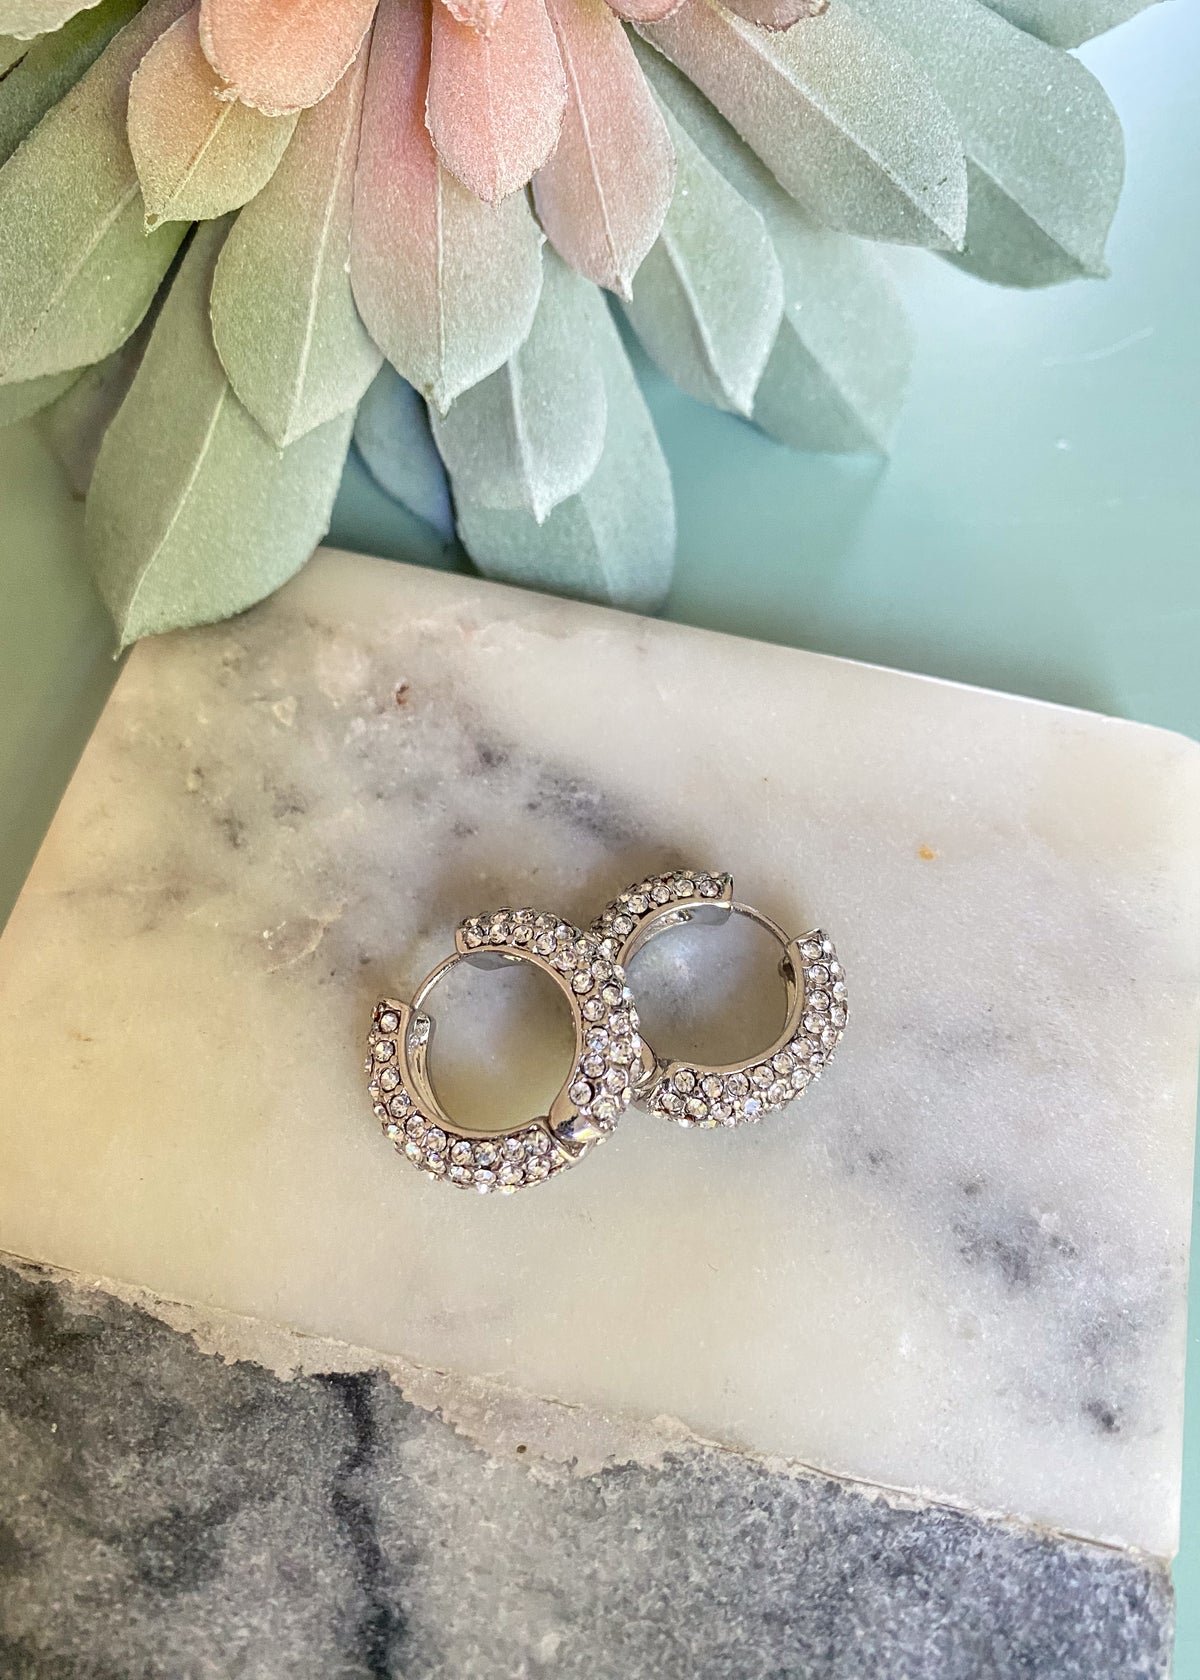 'Darling' Silver with Crystal Huggie Earrings-Blingy and chis crystal filled huggie earrings that can be dressed up or down!-Cali Moon Boutique, Plainville Connecticut